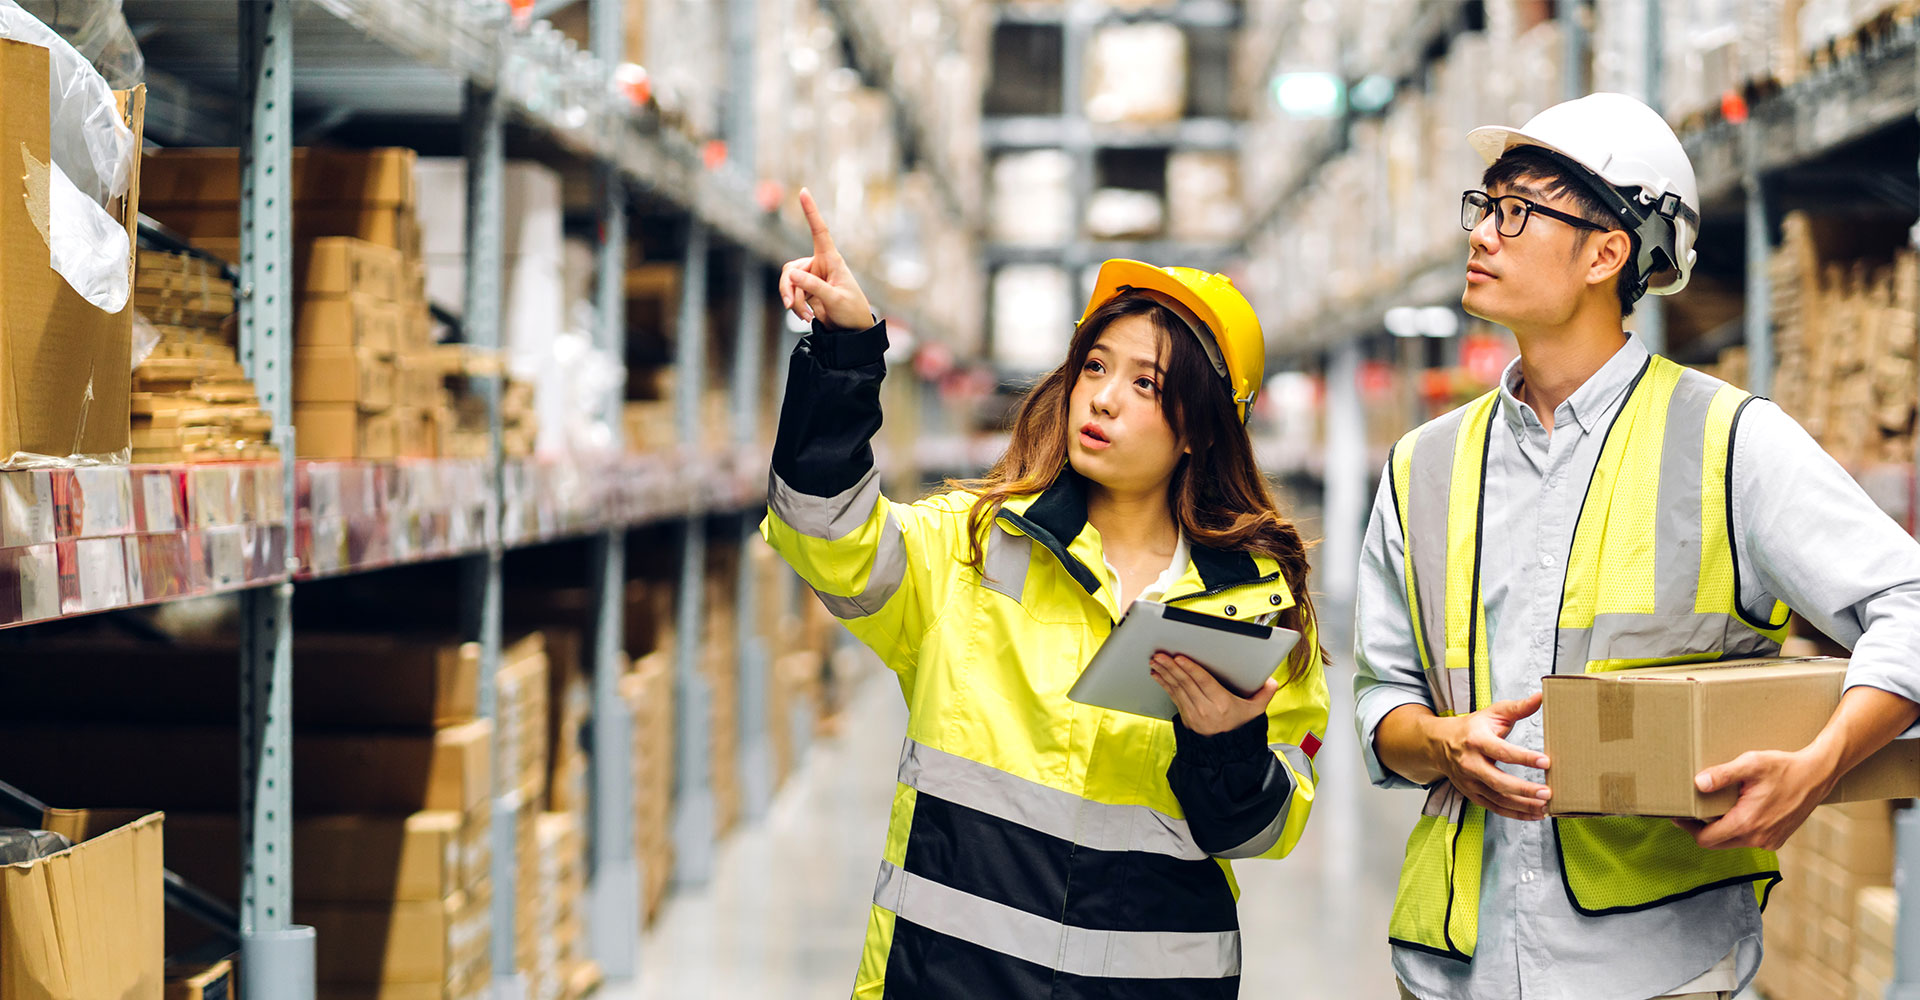 Young female supply chain assistant in high viz overcoat and safety gear coordinating with supply chain manager in hard hat on current inventory needs